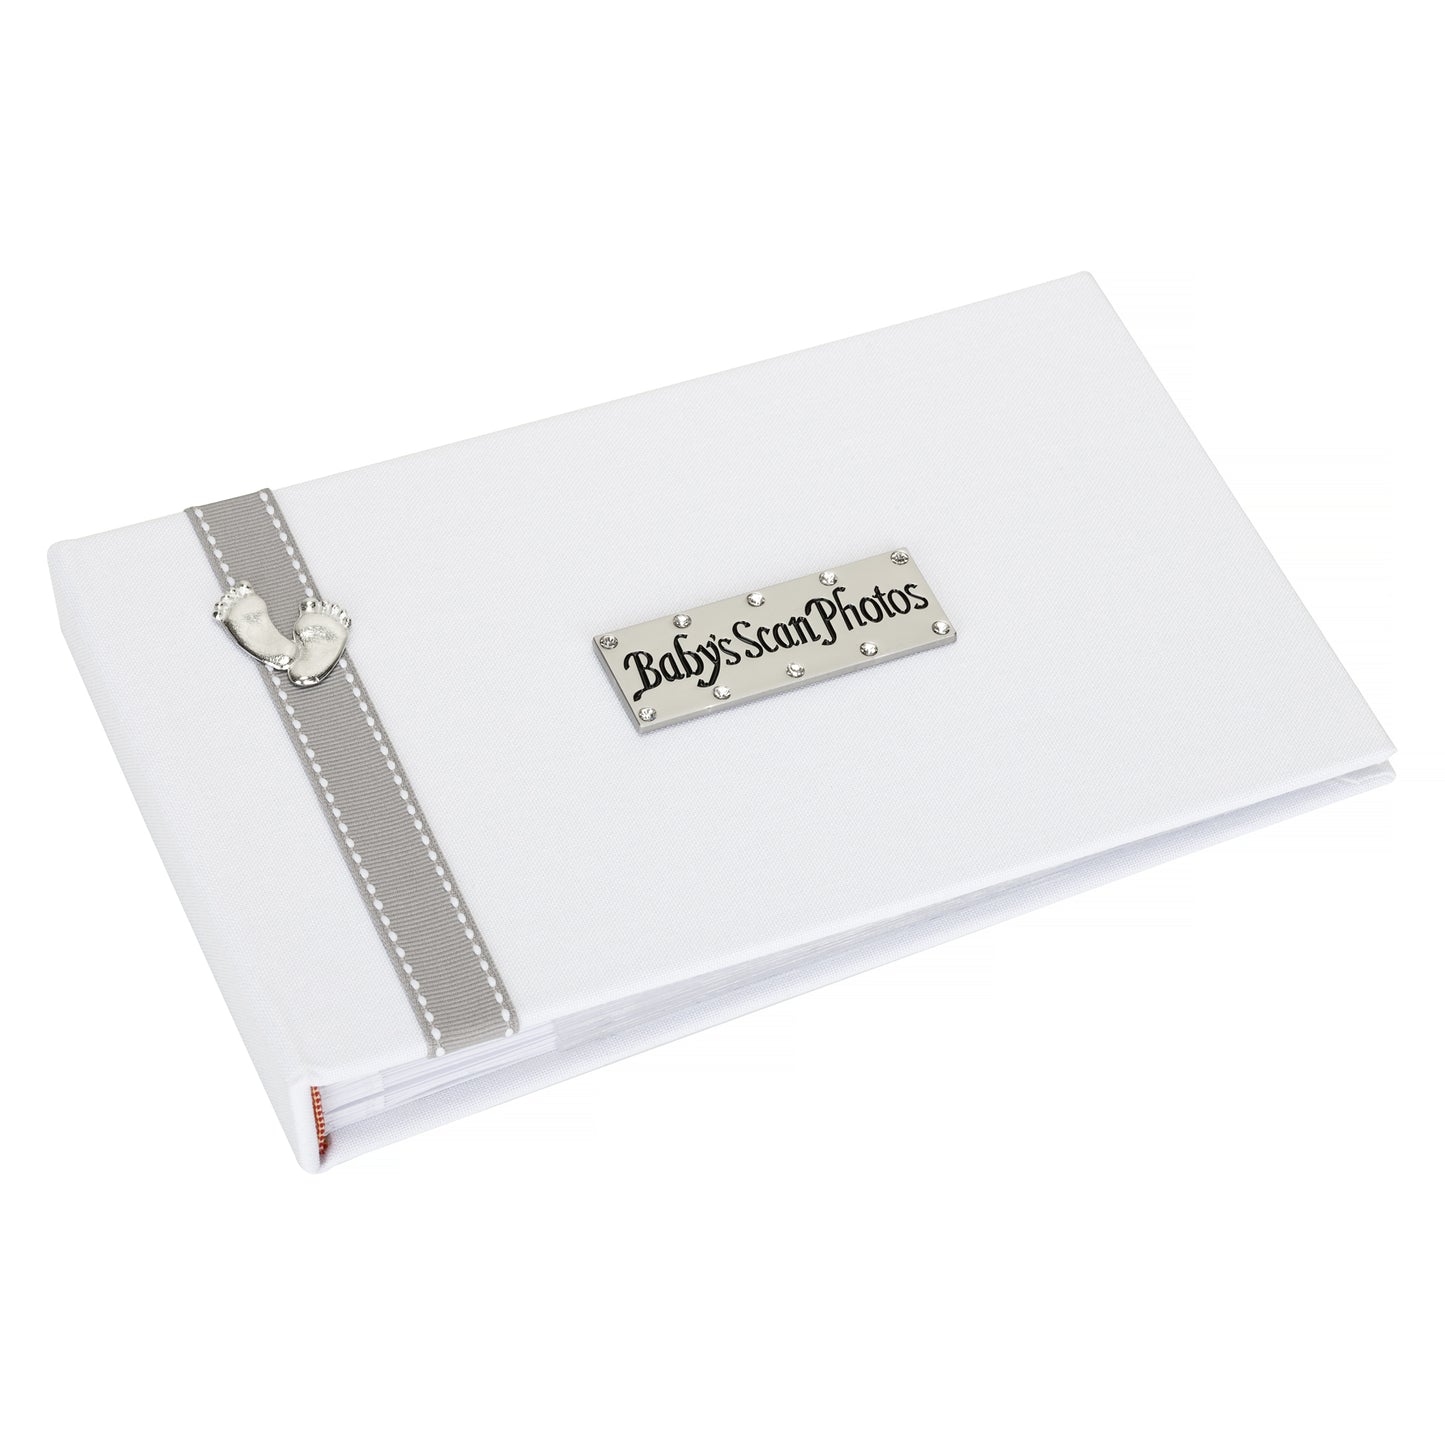 Baby's Scan Photos ~ White linen album with grey stitched ribbon